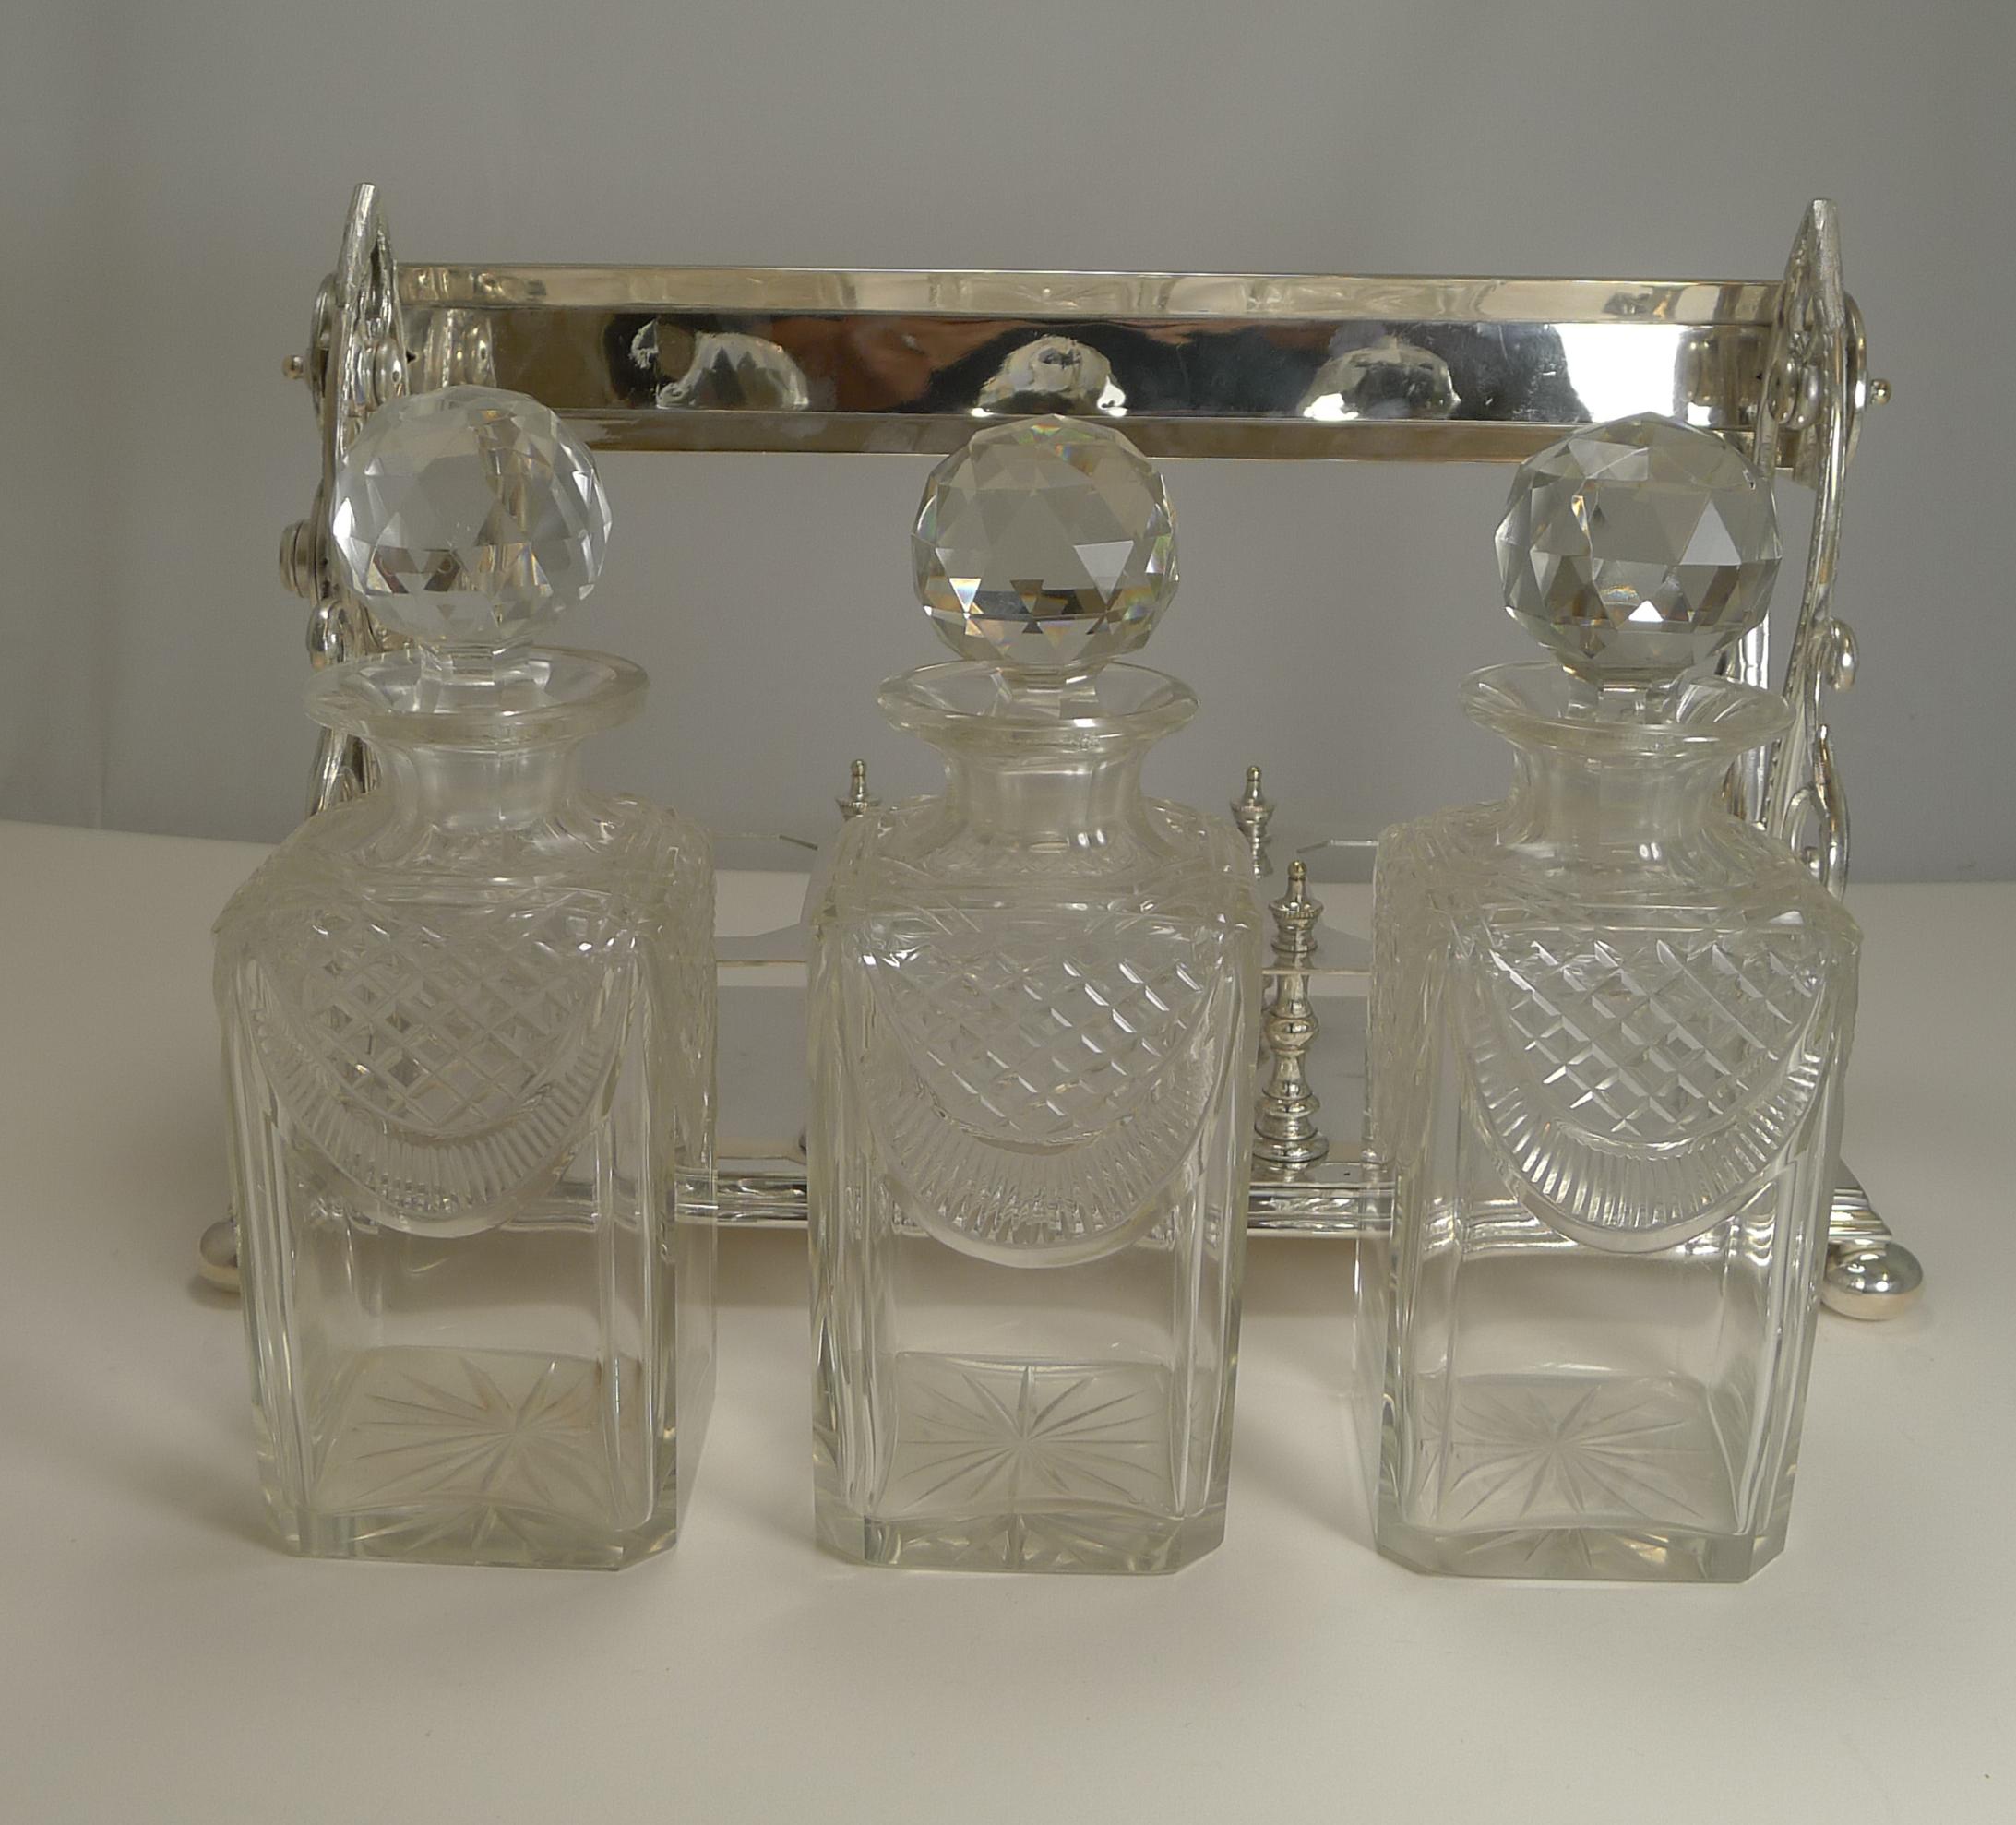 A magnificent and very grand late Victorian three bottle tantalus dating to circa 1900.

The frame is made from silver plate with a fabulous handle to the top and highly decorative end panels. The lock comes with a working key and when unlocked